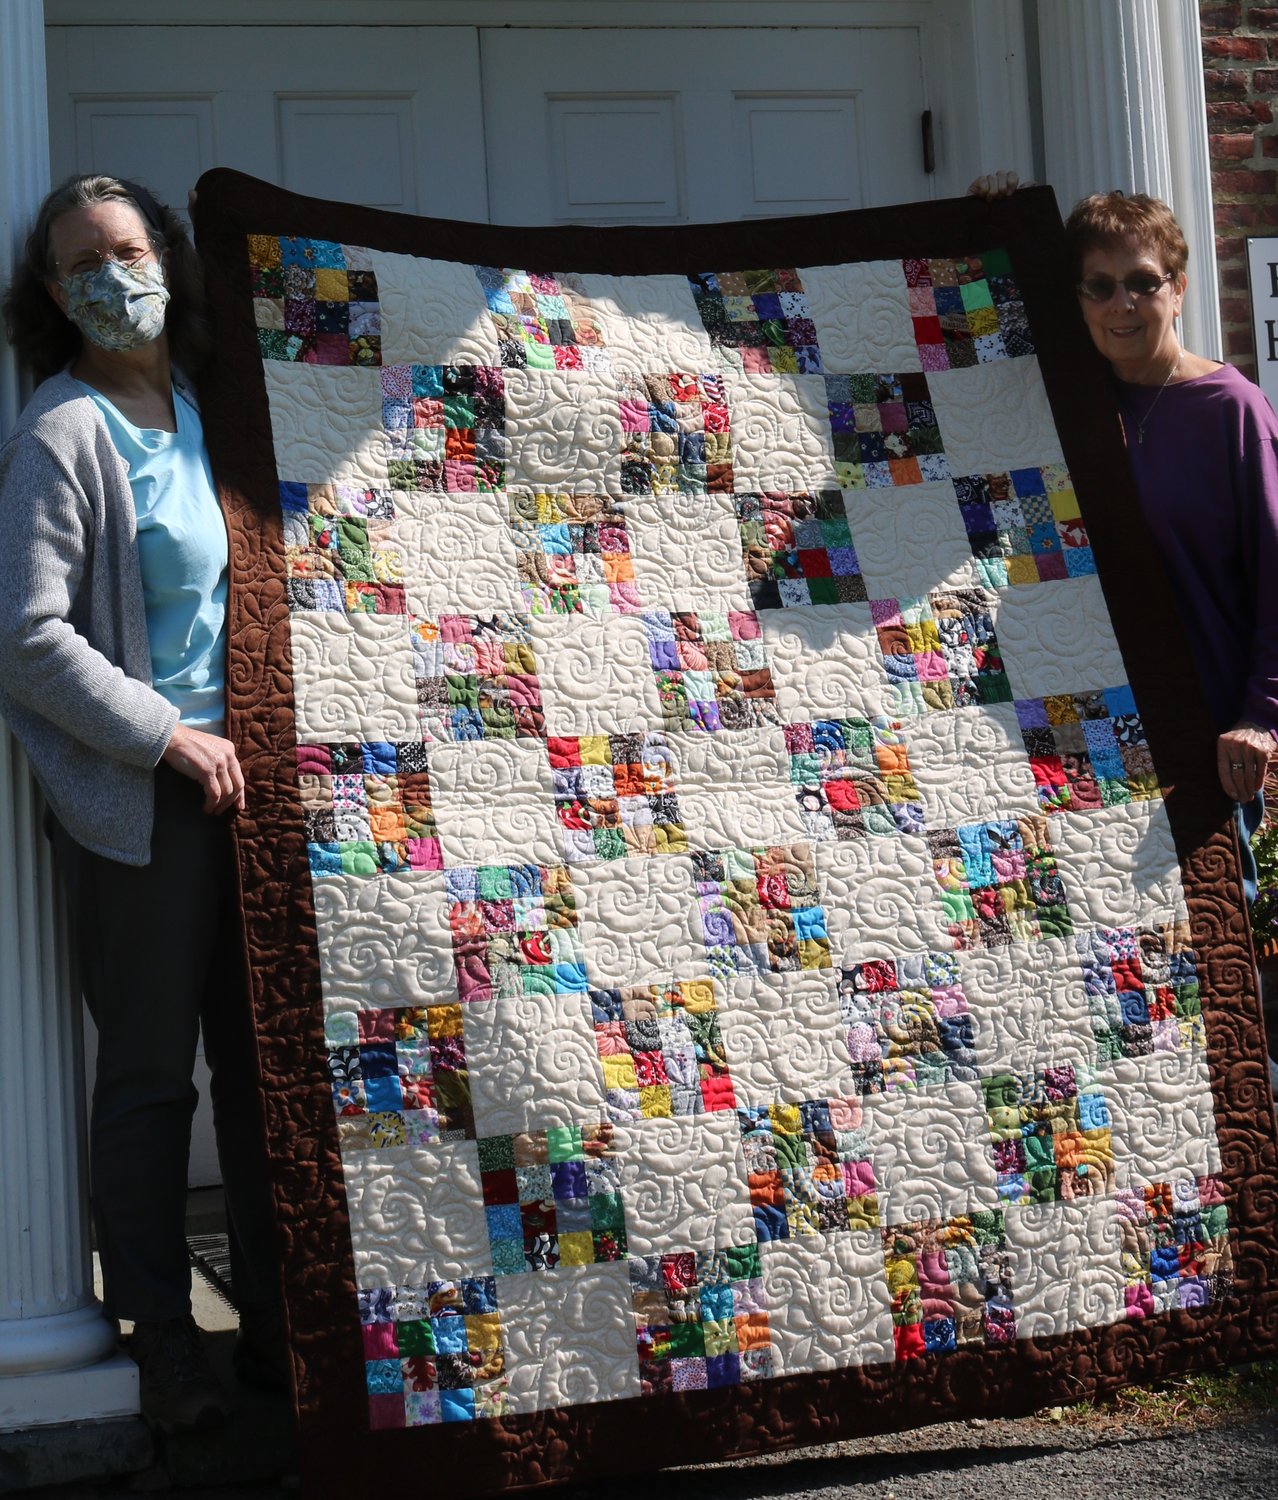 This quilt (62 inches by 76” inches) is one of the prizes in a raffle drawing to raise funds for Bethany Public Library. Holding the quilt are library director Kate Baxter, left, and Nancy Swingle, the quilt’s creator.